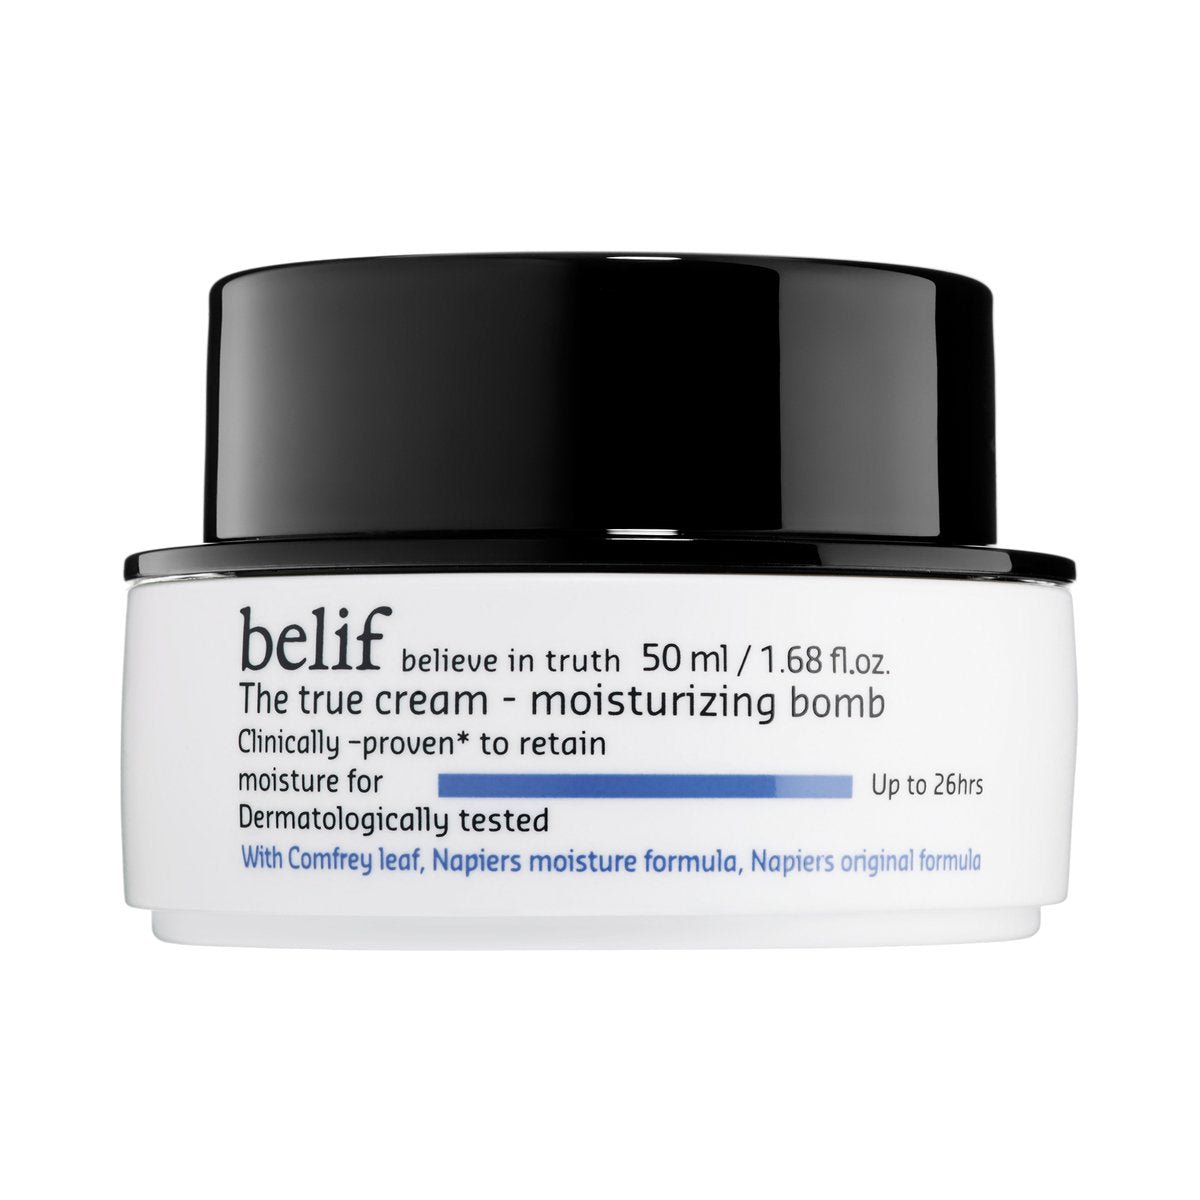 belif THE TRUE CREAM MOISTURIZING BOMB 50ml | Moisturizer for Combination to Oily Skin | Face Cream, Hydration, Clean Beauty